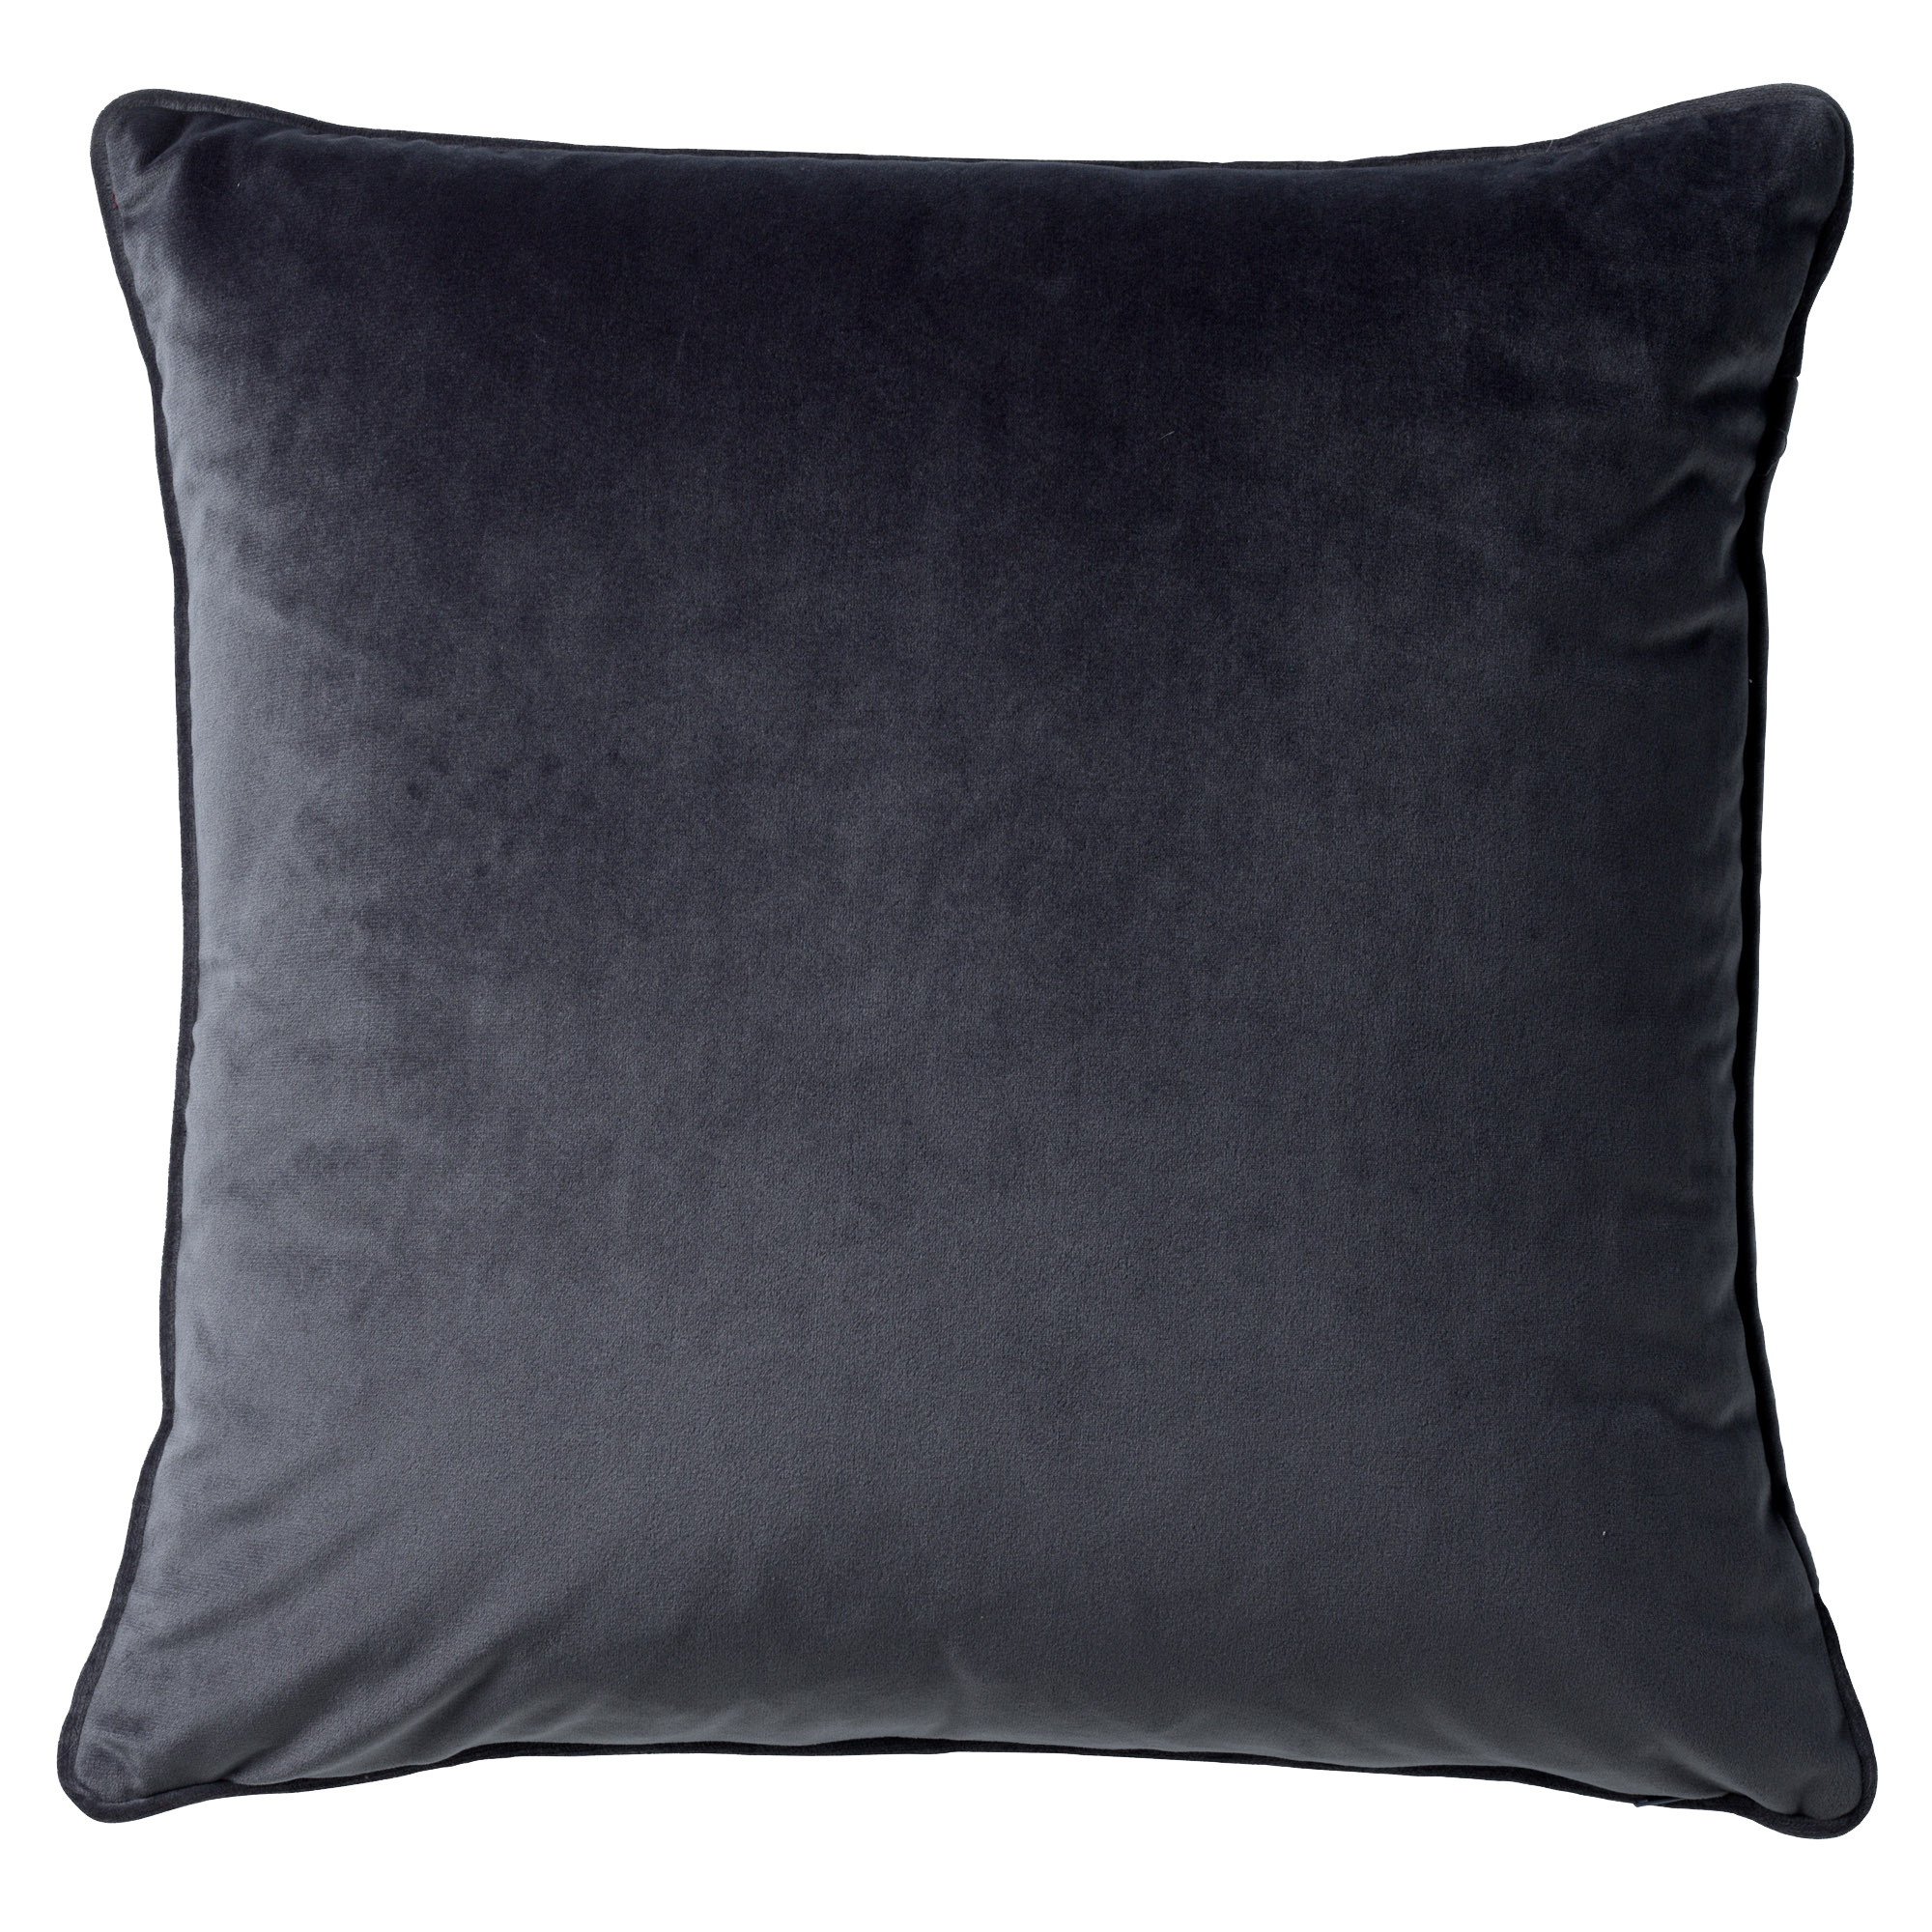 FINNA - Cushion 45x45 cm with cushion cover made of 100% recycled polyester - Eco Line collection - Charcoal Gray - anthracite